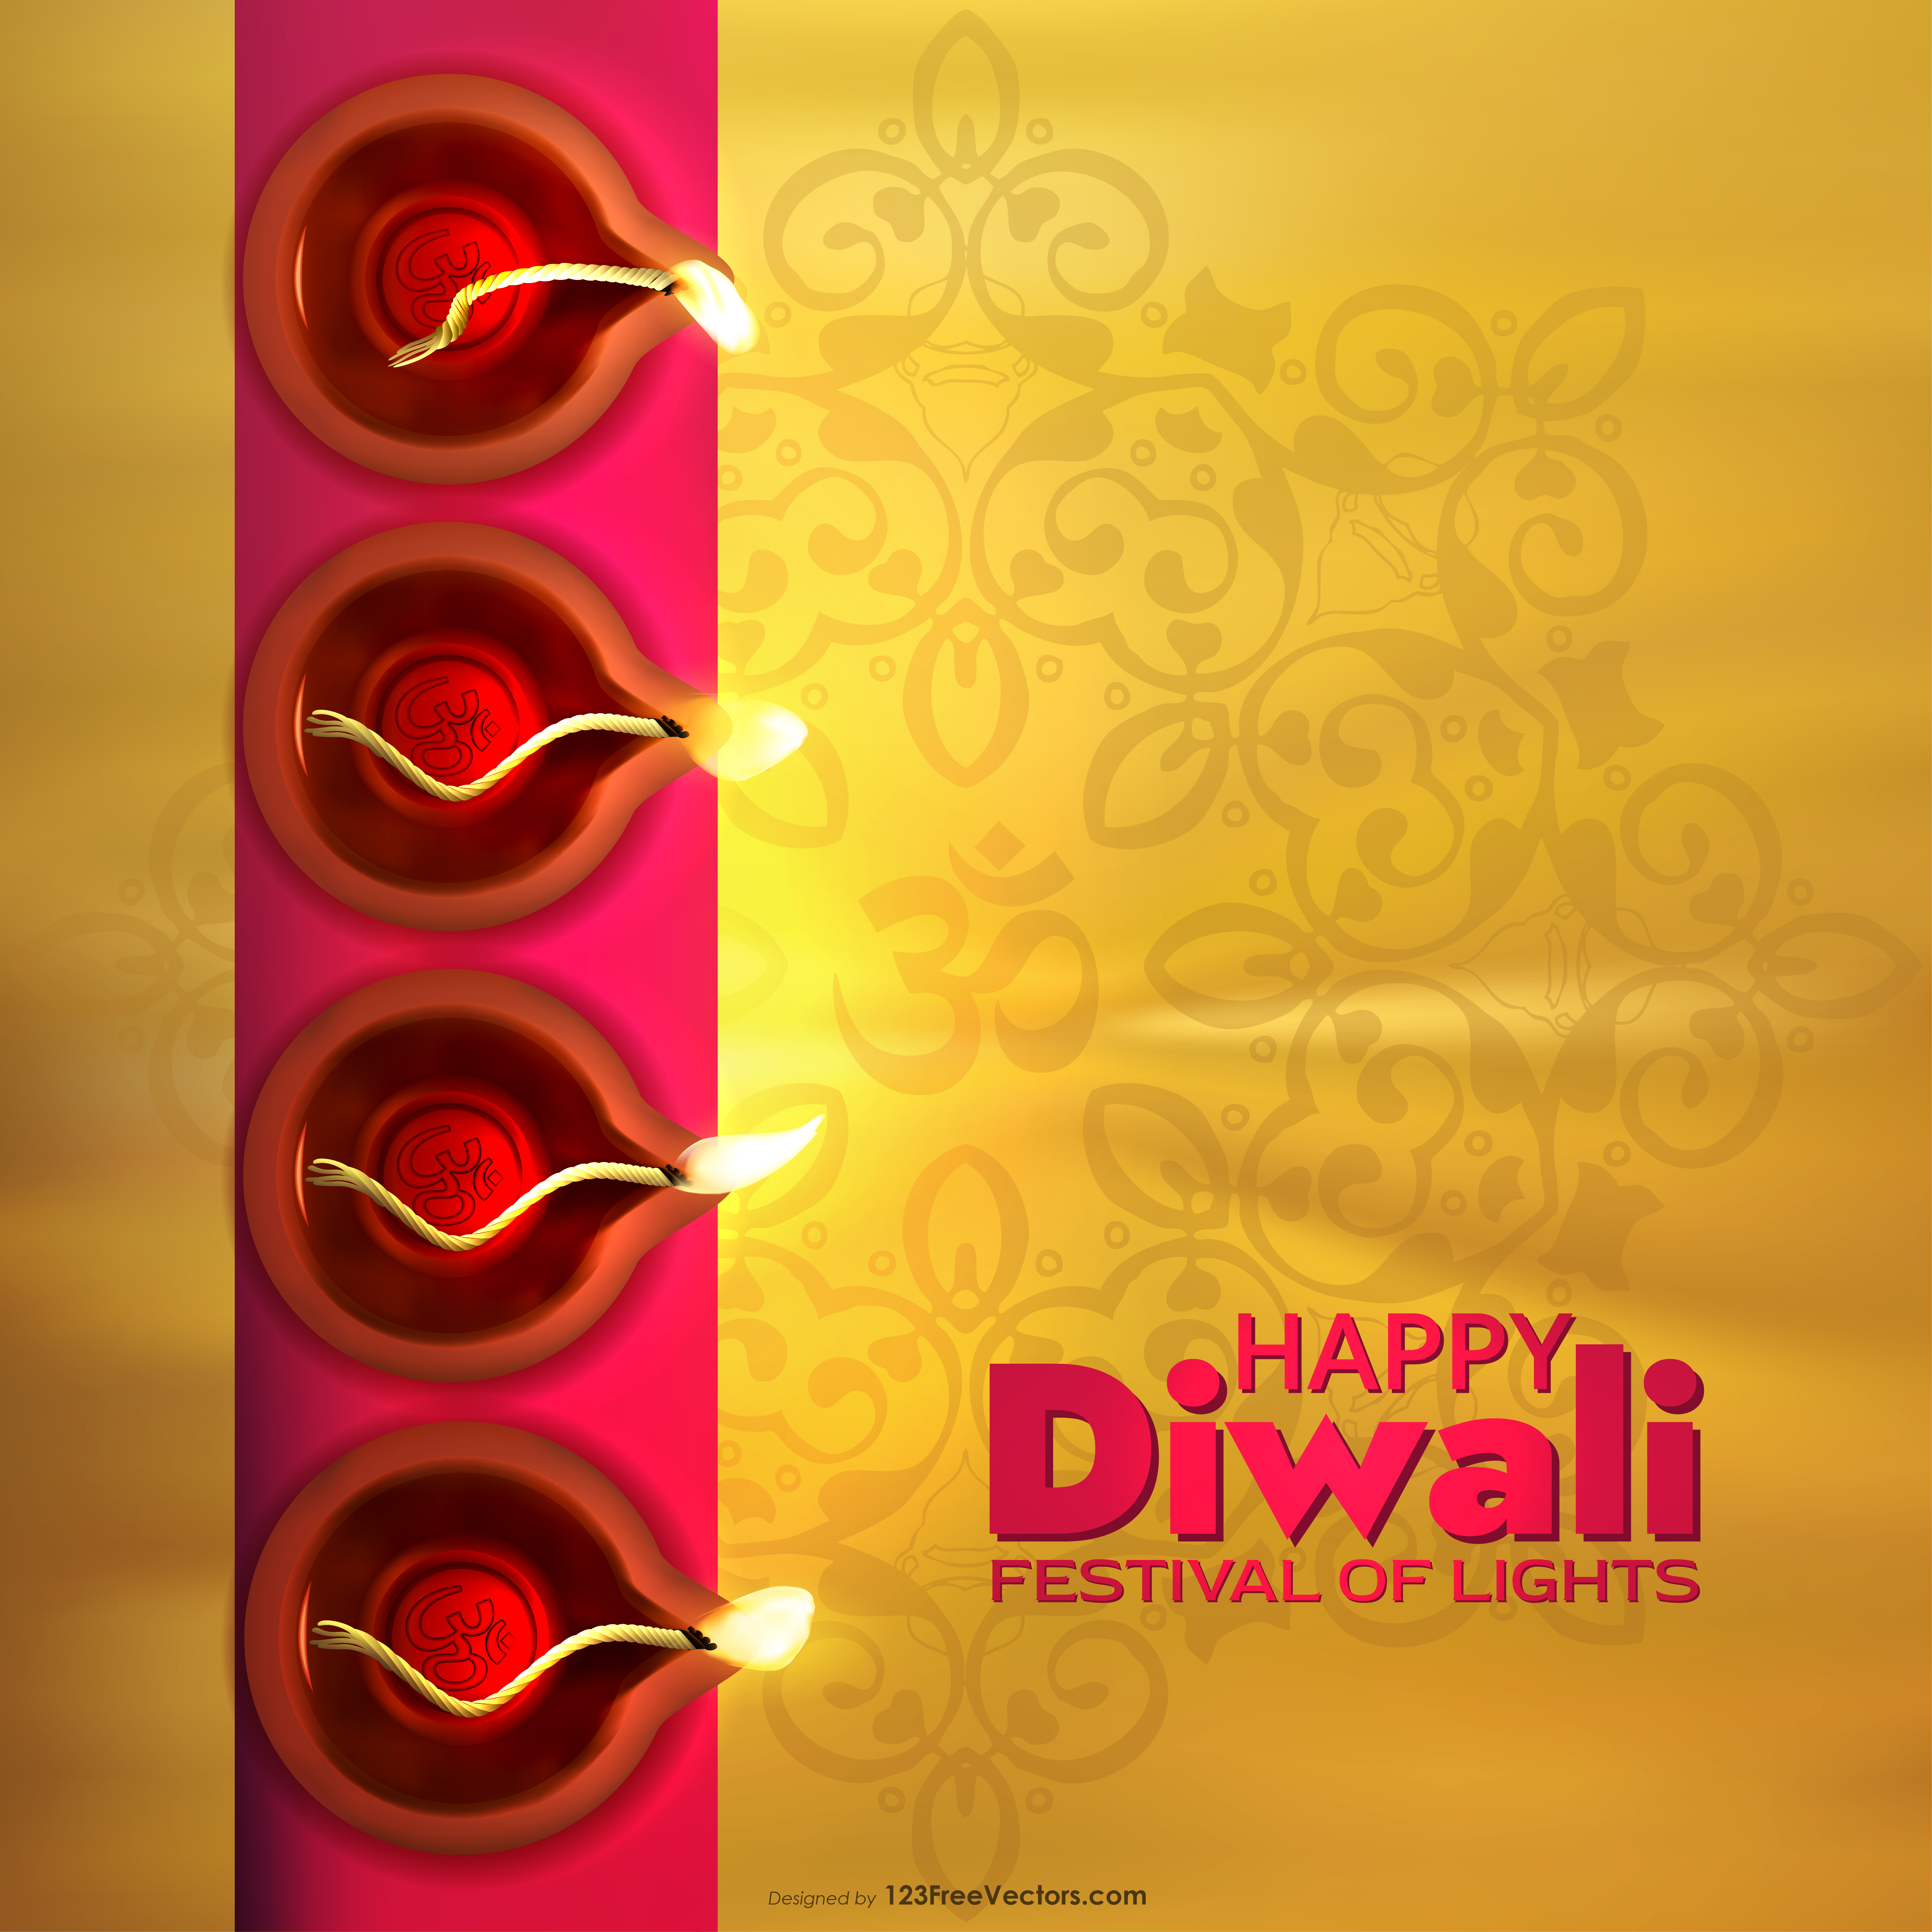 Free Diwali Background with Top View of Diya Lamps Image